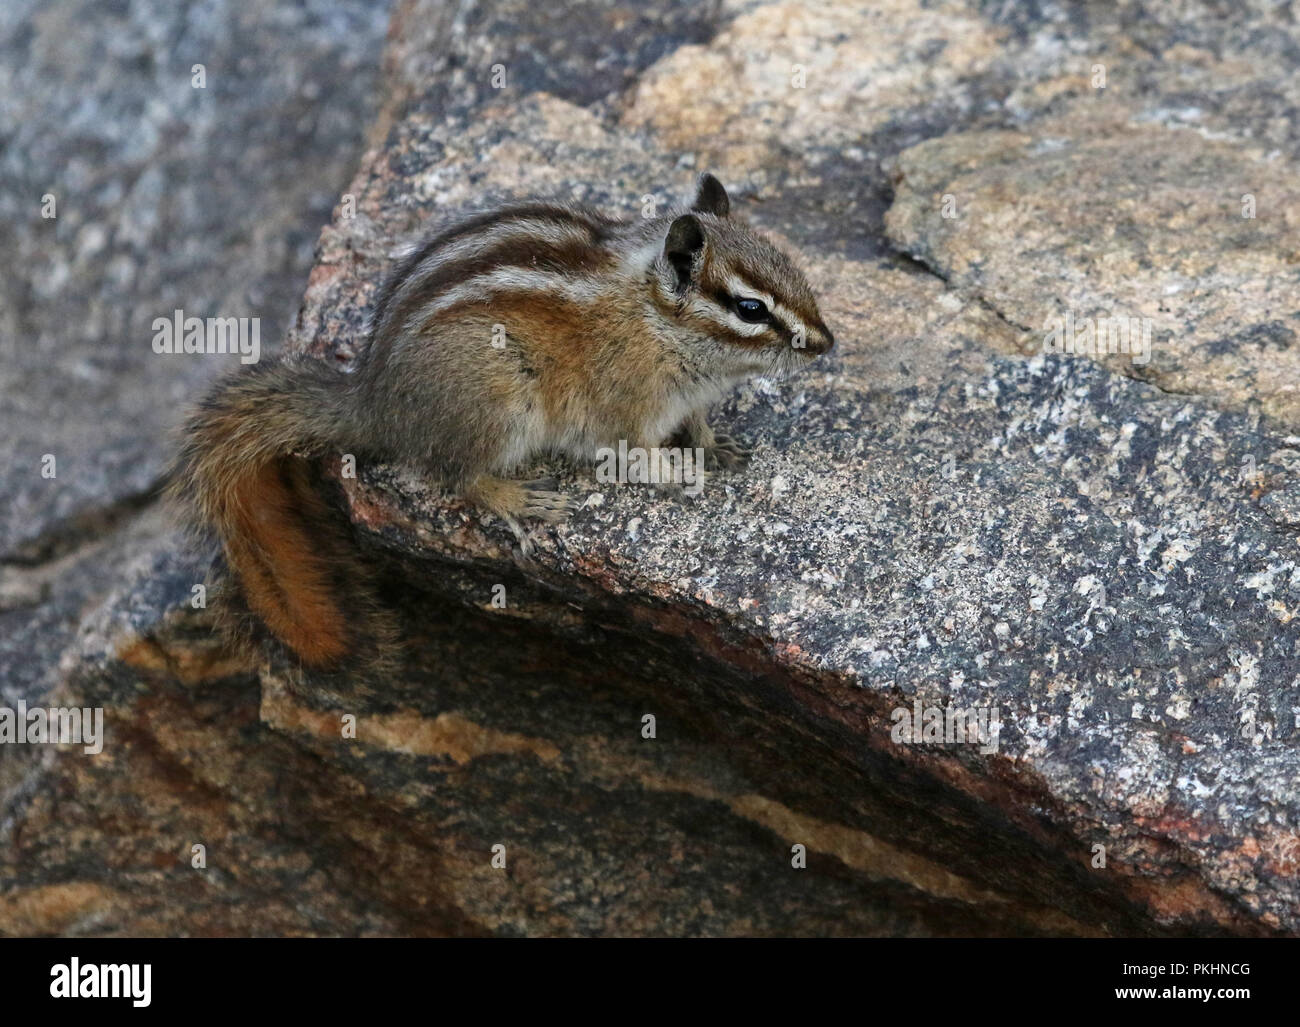 A Least Chipmunk (Tamias minimus) sitting on a rock in Rocky Mountain National Park, Colorado. Stock Photo